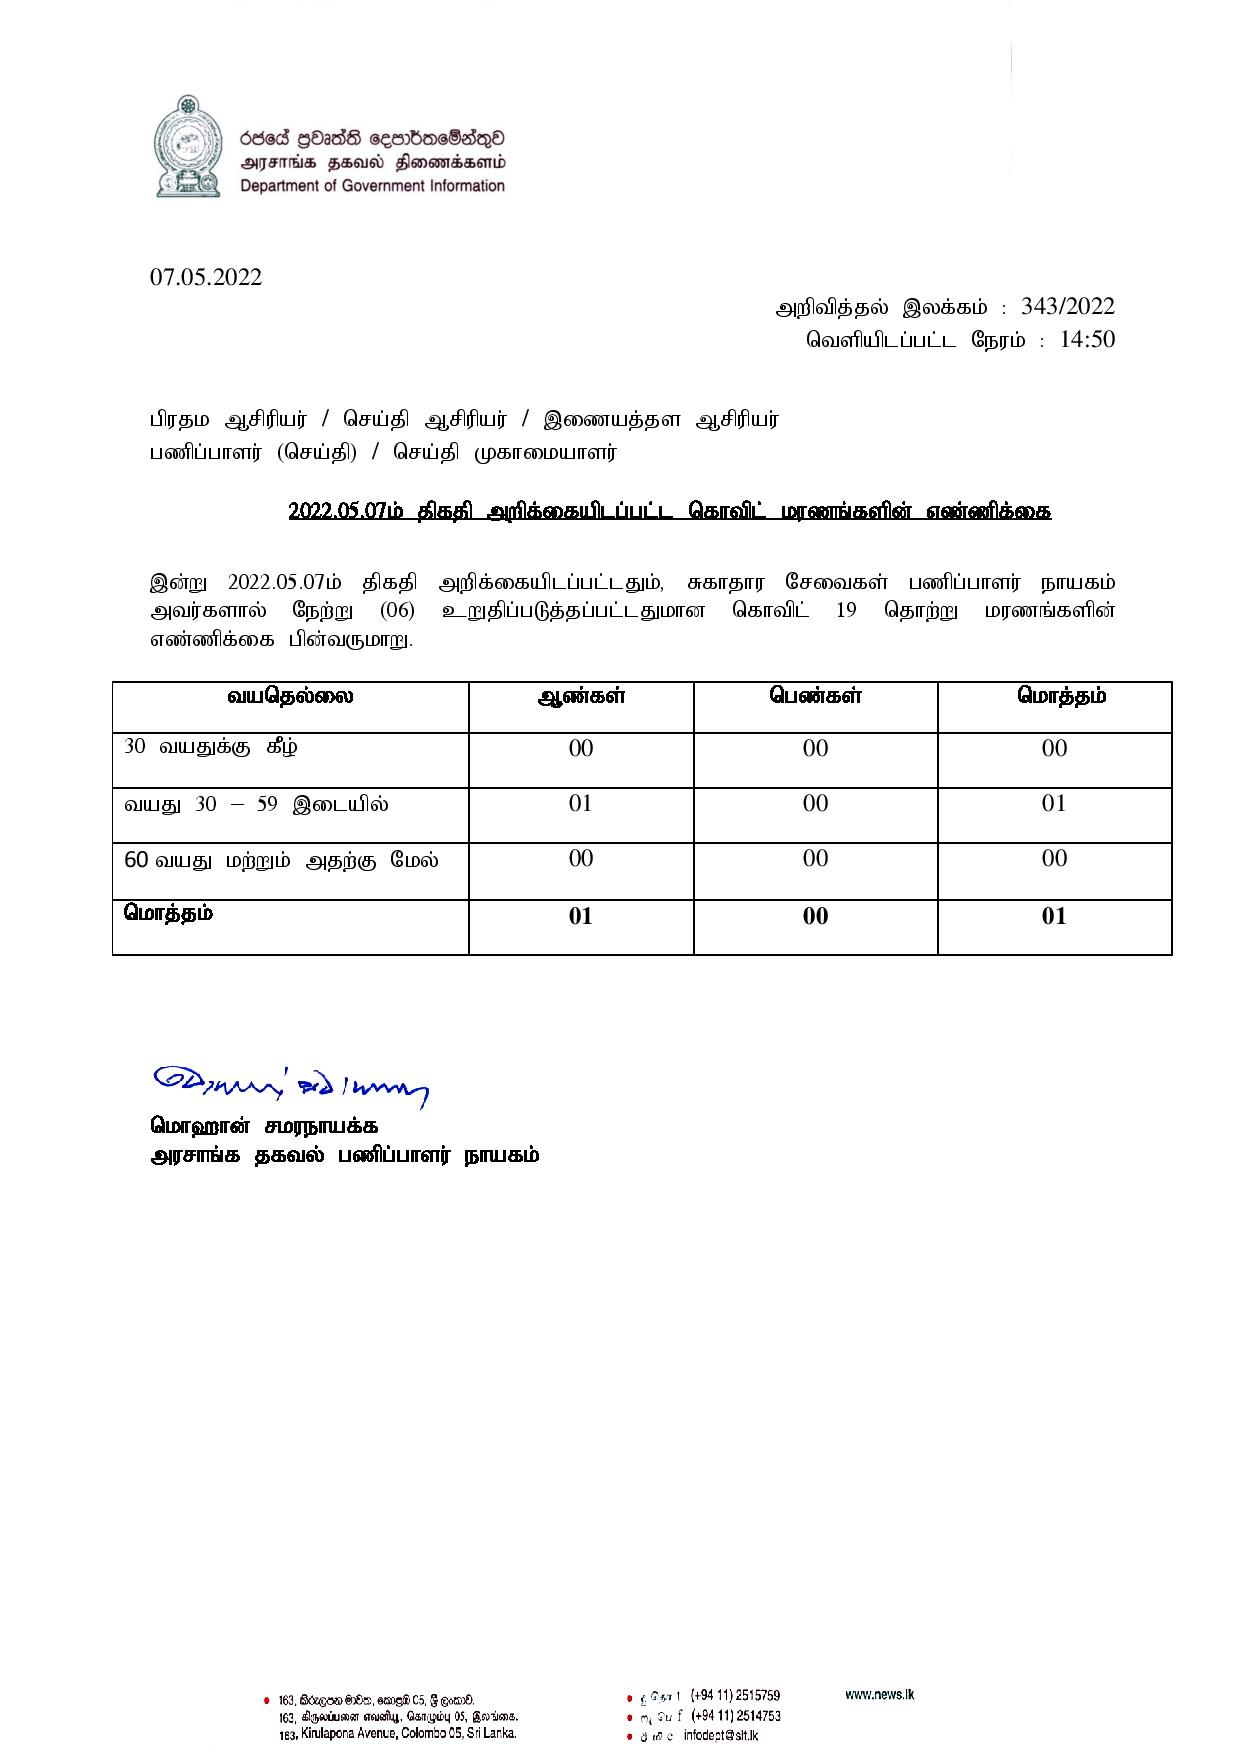 Release No 343 Tamil page 001